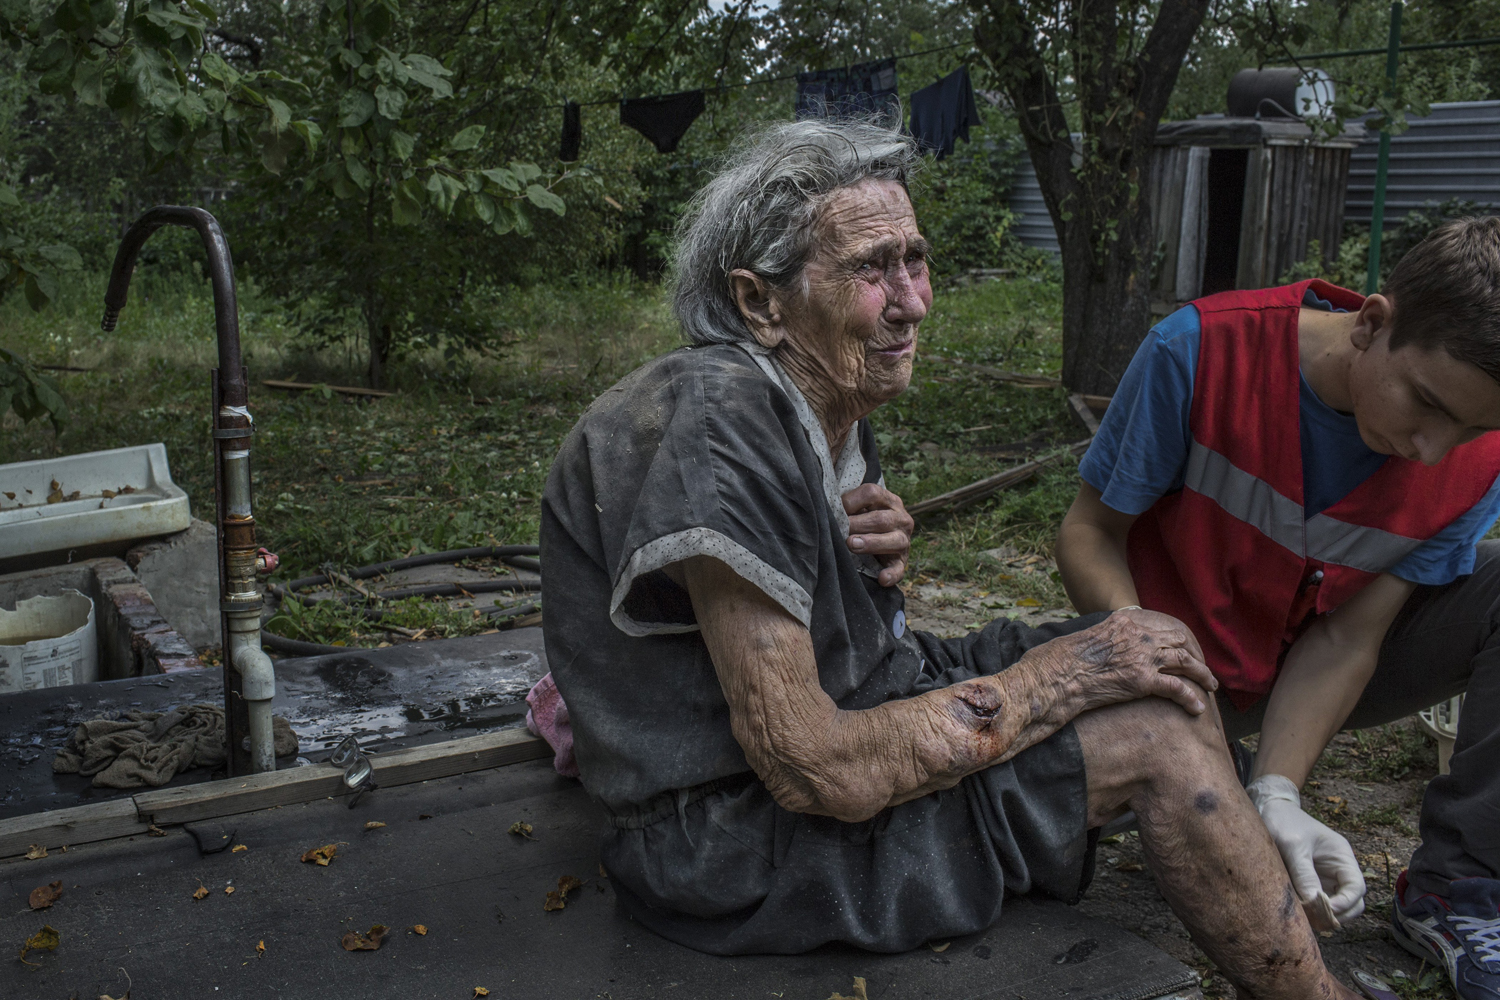 Aug. 10, 2014. Lisa Soroka, 80, who lost a grandson to a rocket attack, is treated for injuries after heavy shelling in the morning near the city's airport, in Donetsk, Ukraine.